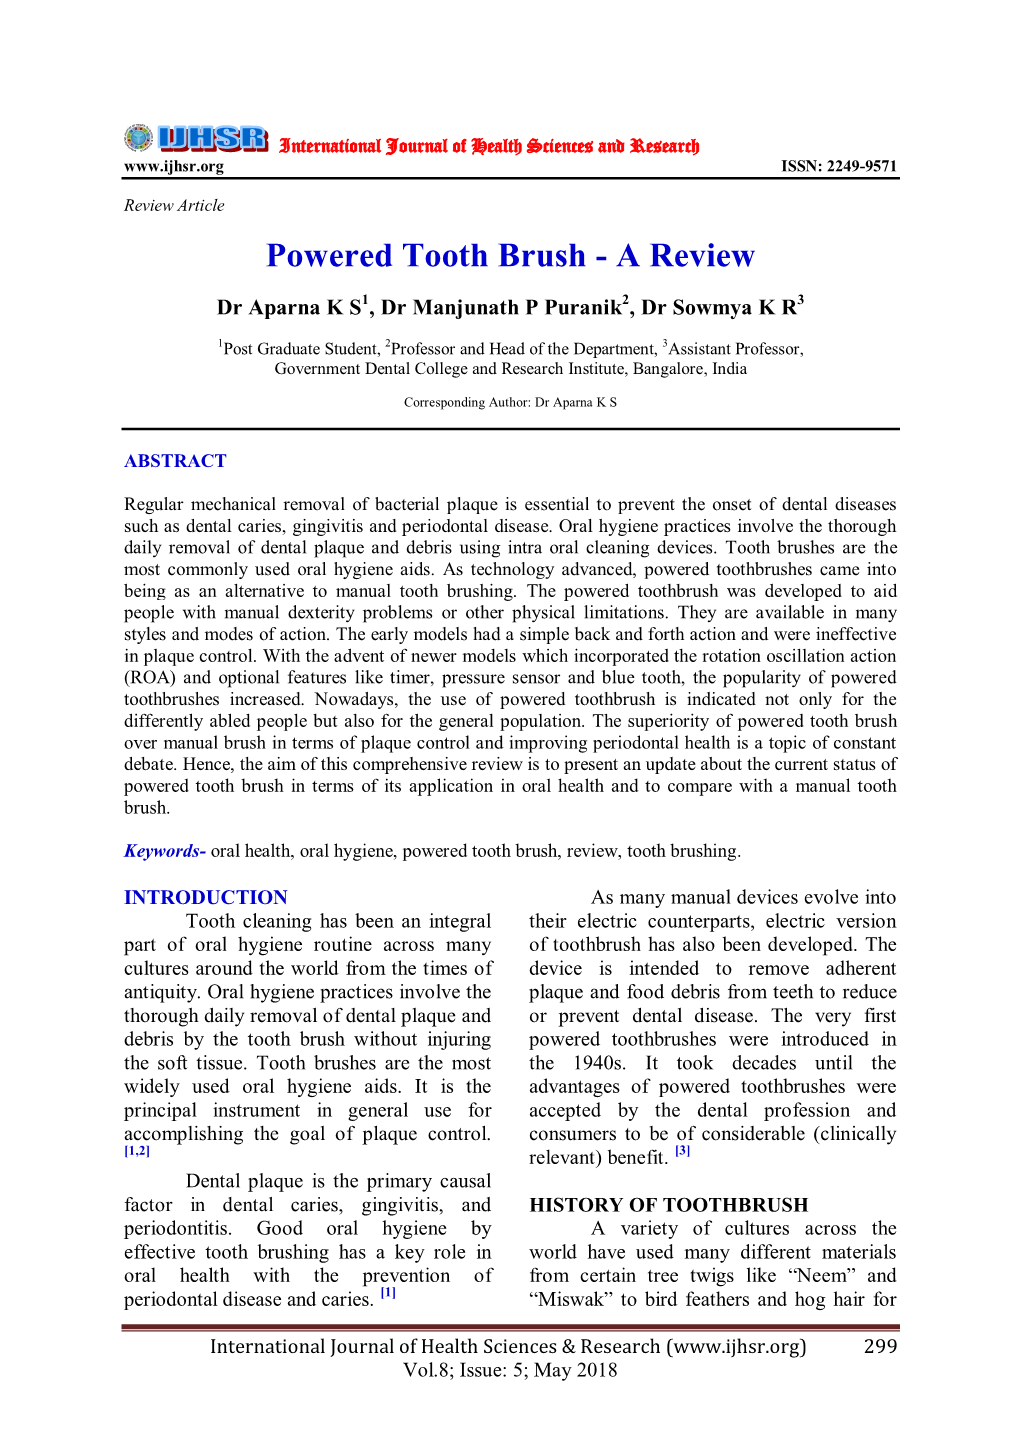 Powered Tooth Brush - a Review